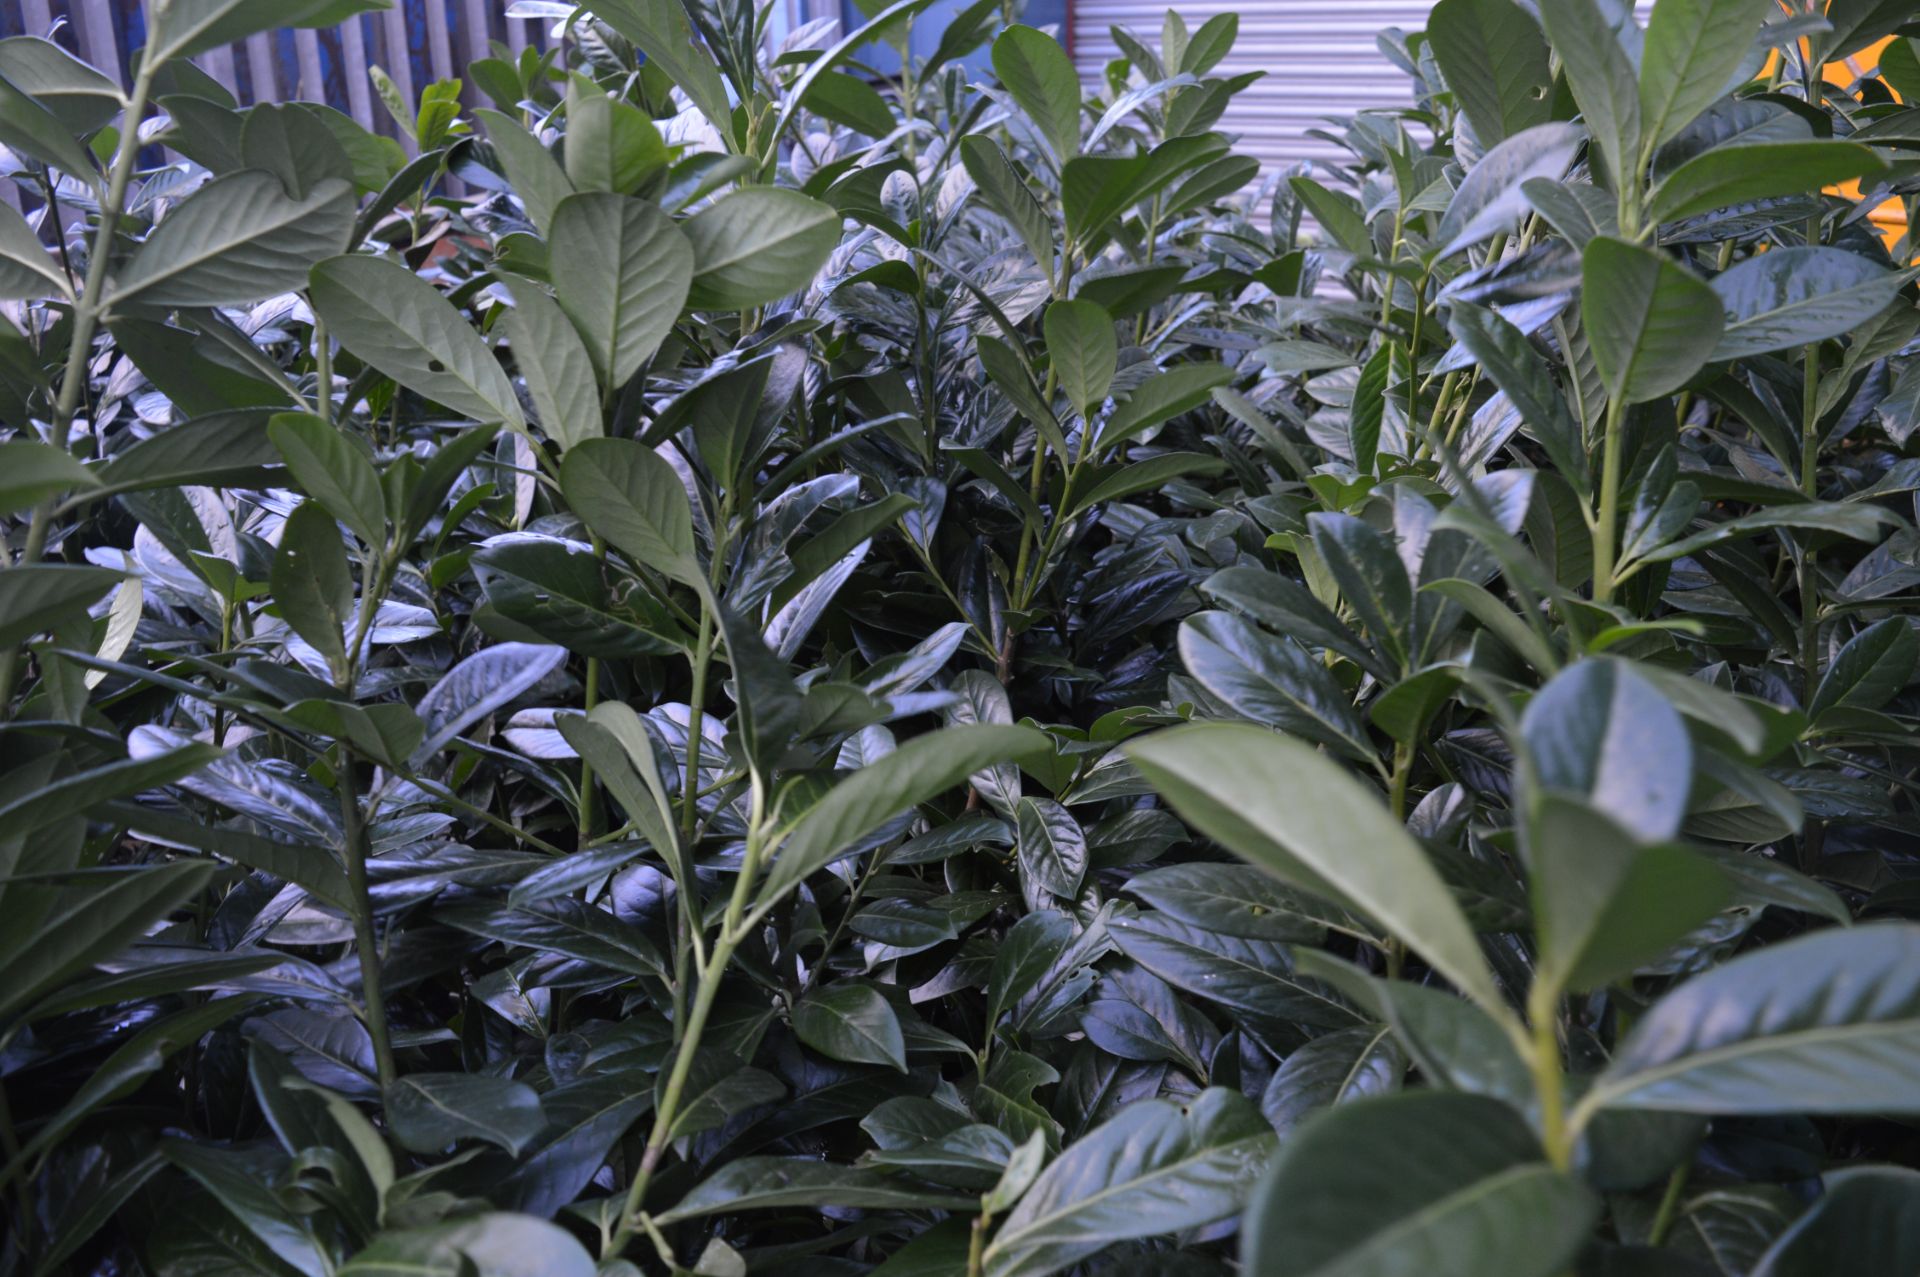 5 x Laurel Potted Garden Plants - Approx 4 to 5 Feet Tall - CL057 - Location: Welwyn, Hertfordshire, - Image 3 of 5